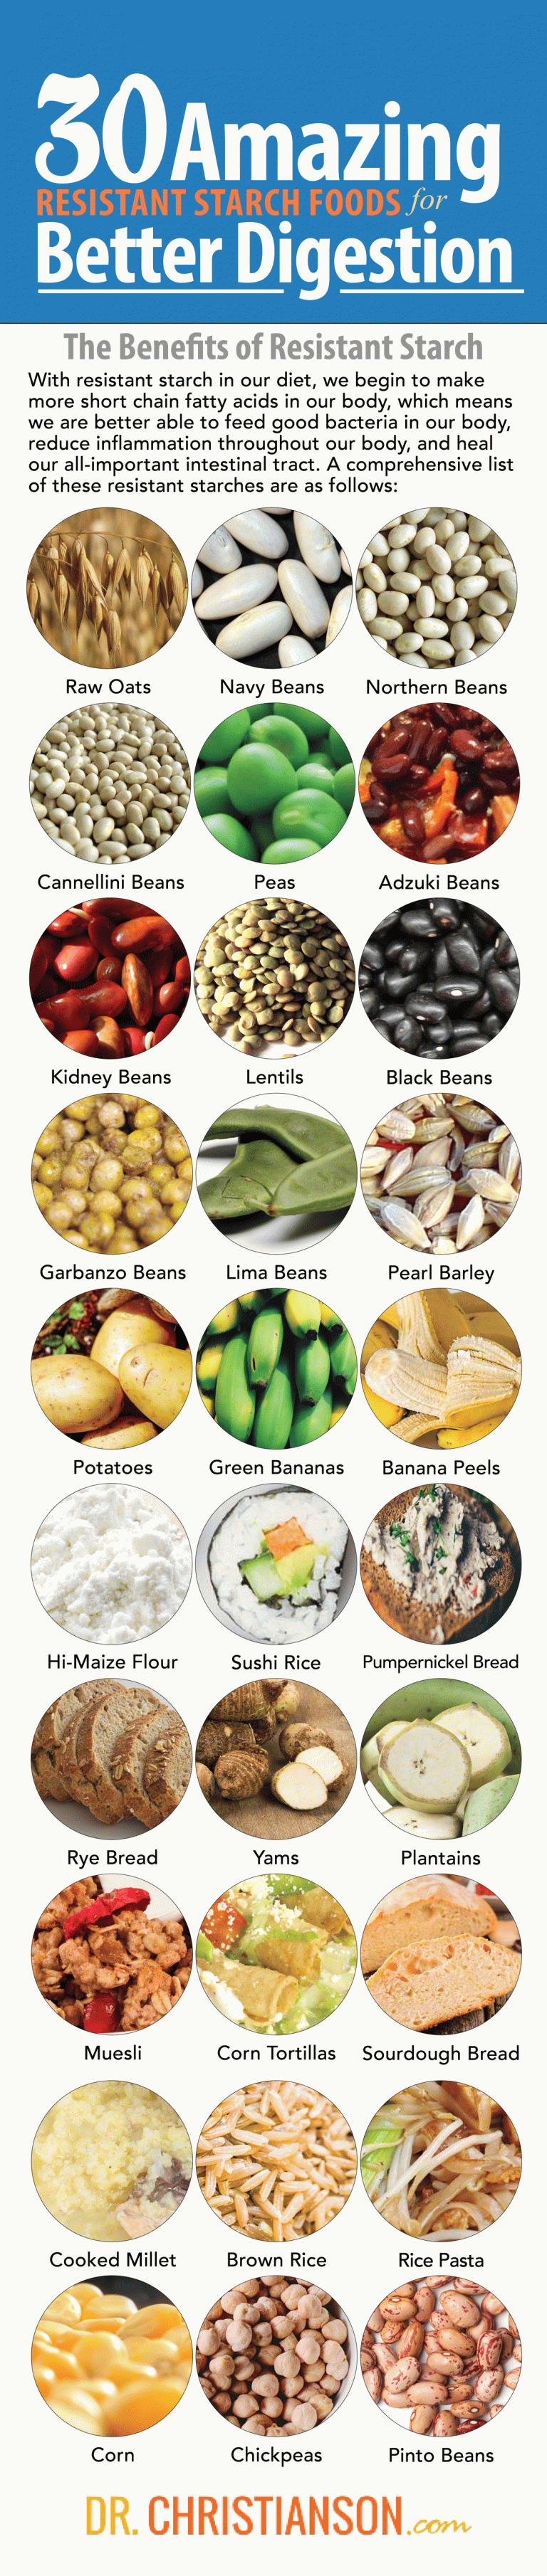 Update 30 Amazing Resistant Starch Foods for Better Digestion Dr